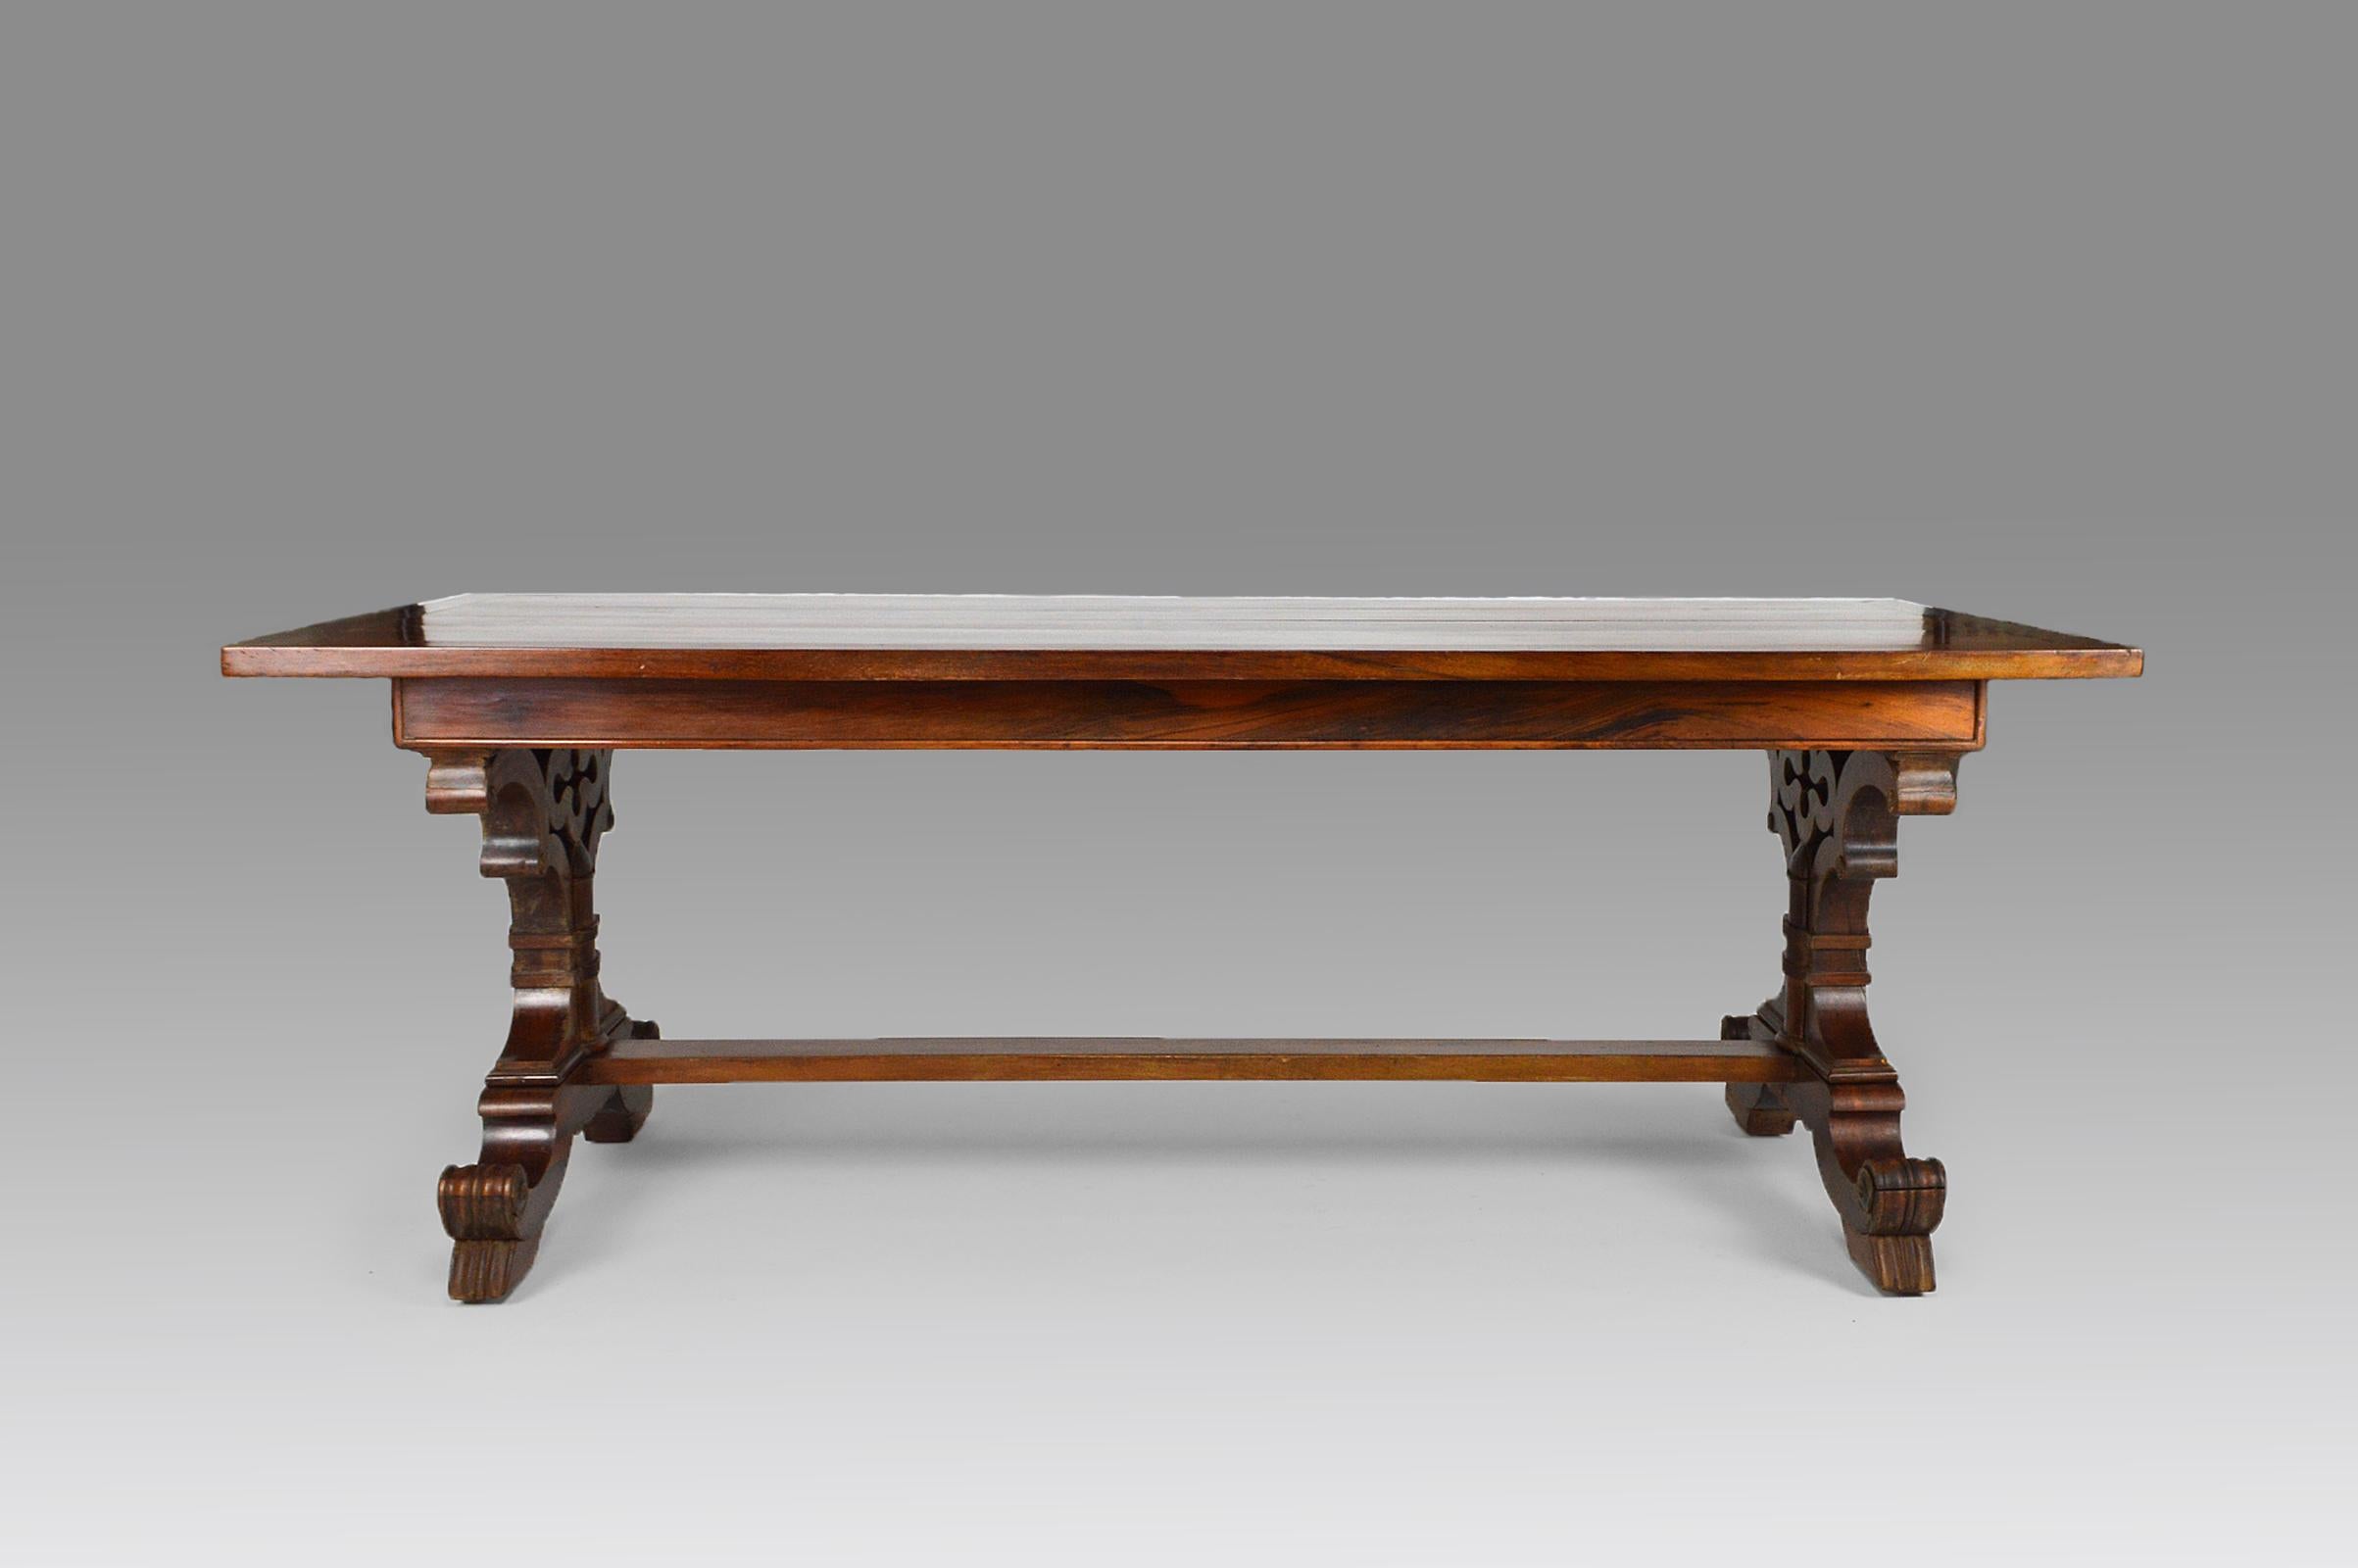 Large table with rectangular top, that can be used for a dining room, office, reception or conference room. In solid mahogany with carved and openwork base.

Neo-Gothic / Gothic Revival style, United Kingdom / England, Victorian Era, circa 1840.

In